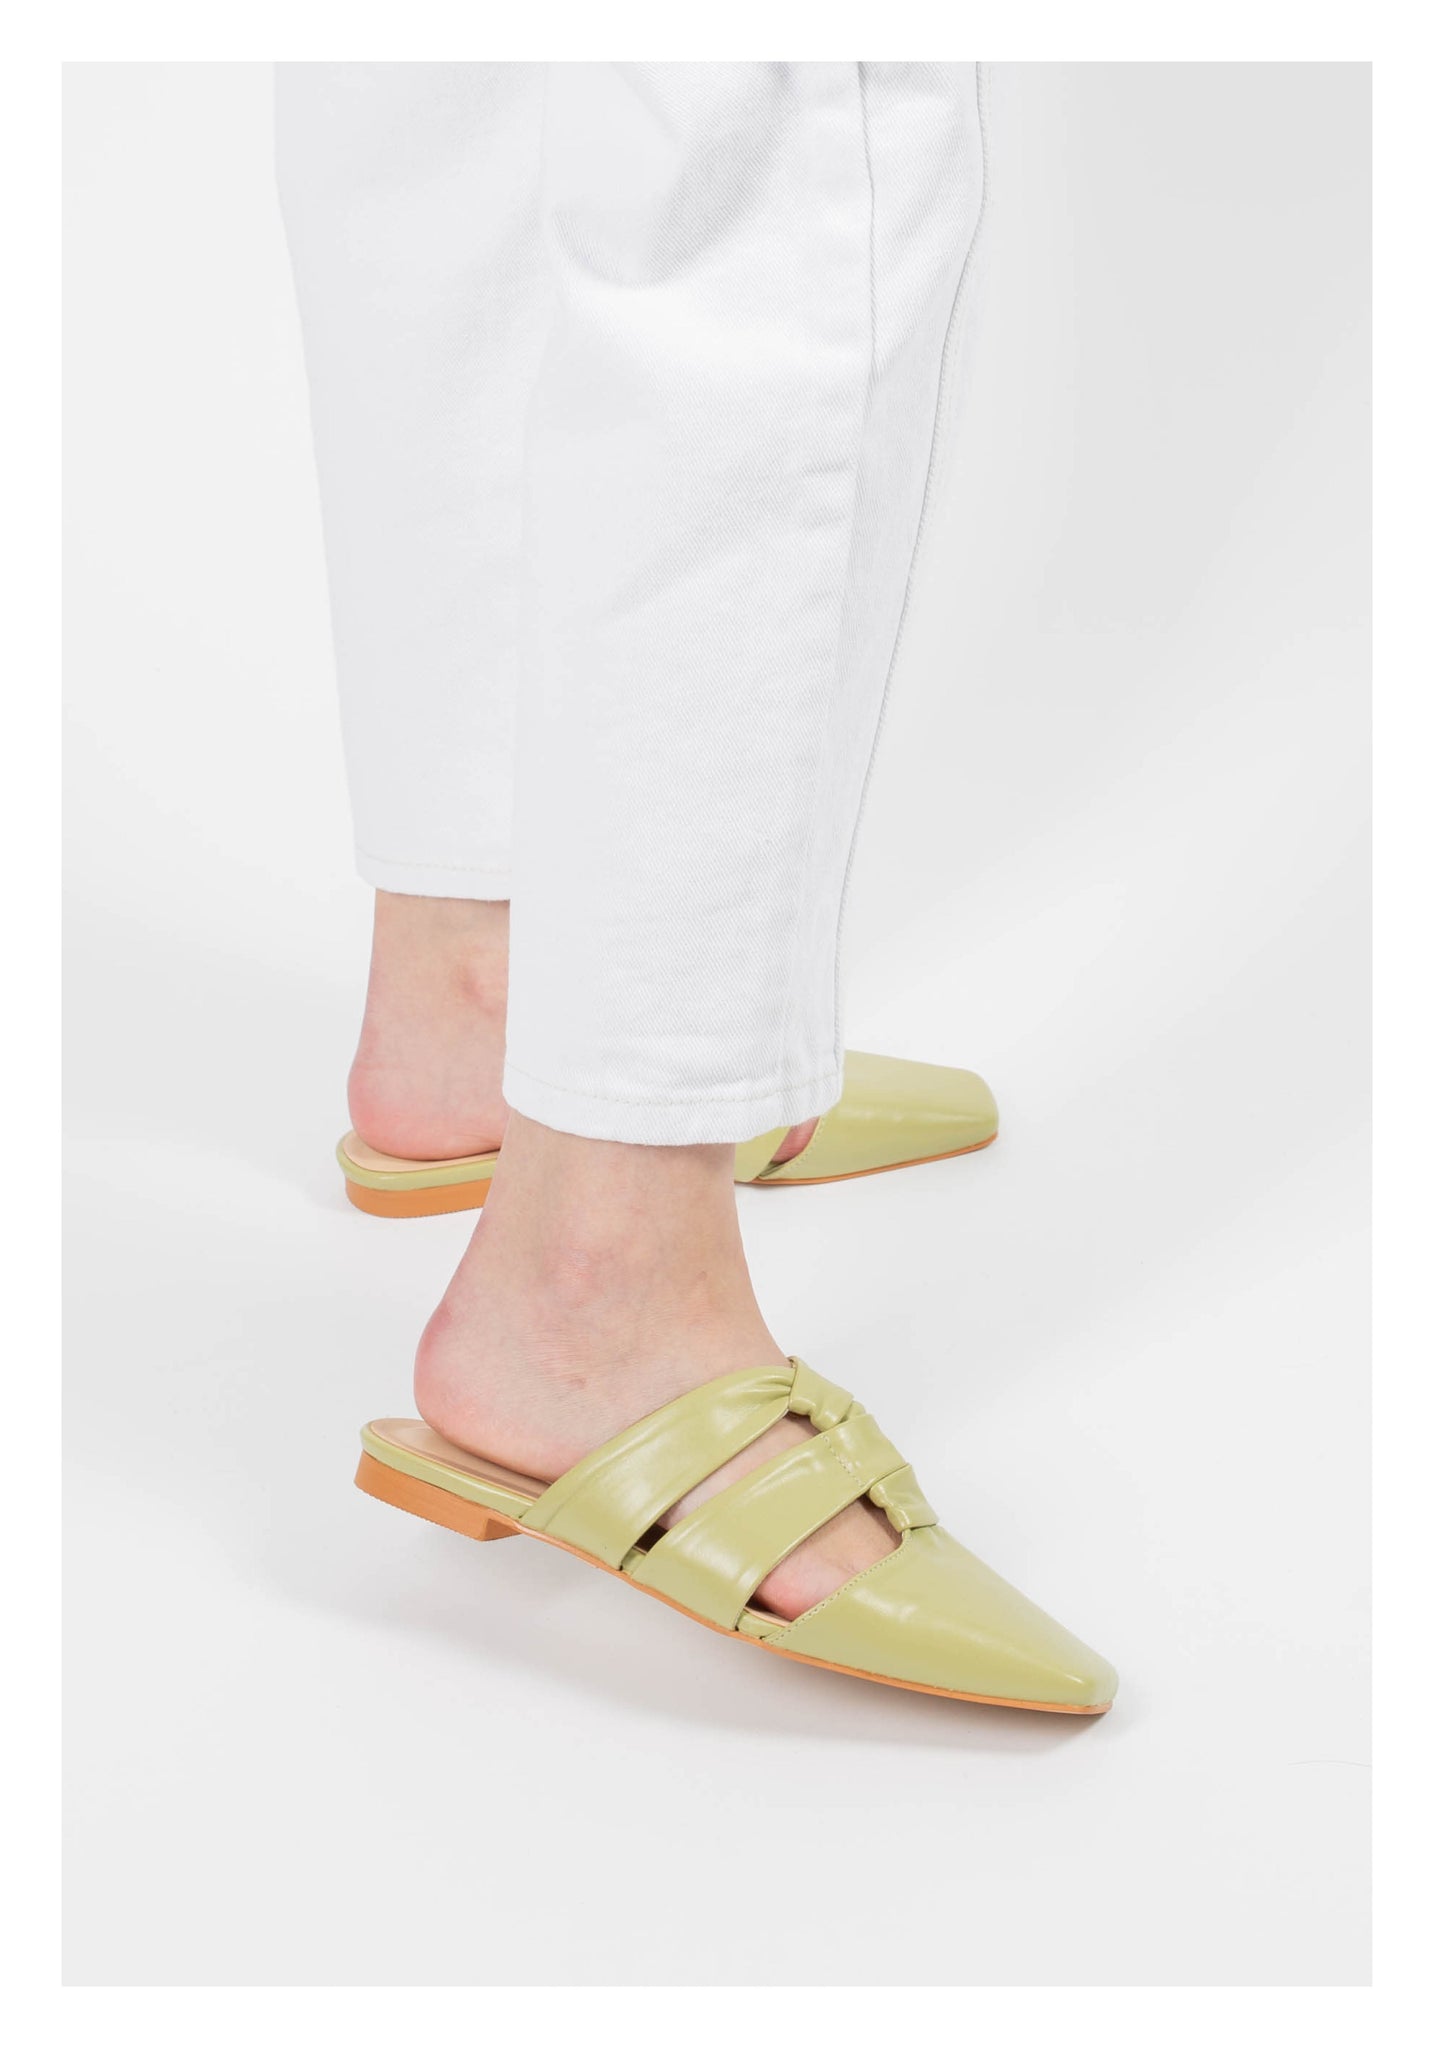 Knot On Knot Mules Avocado - whoami